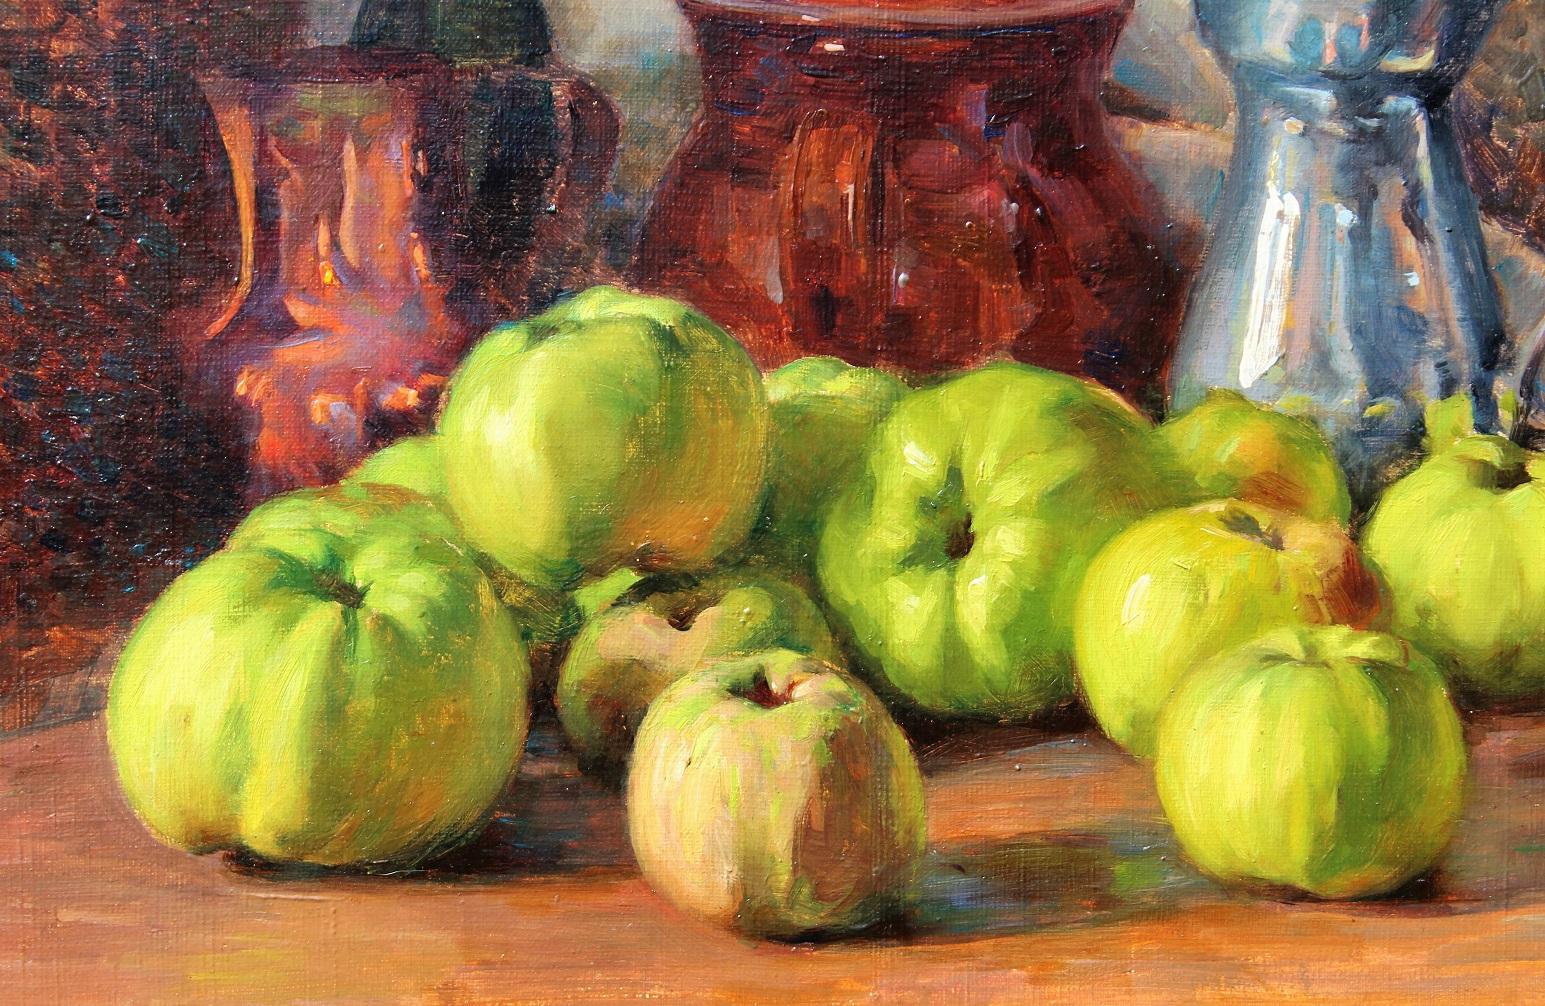 François FORICHON
1865-1952, French
Still life with greens apples
Painting, oil on canvas
Signed 